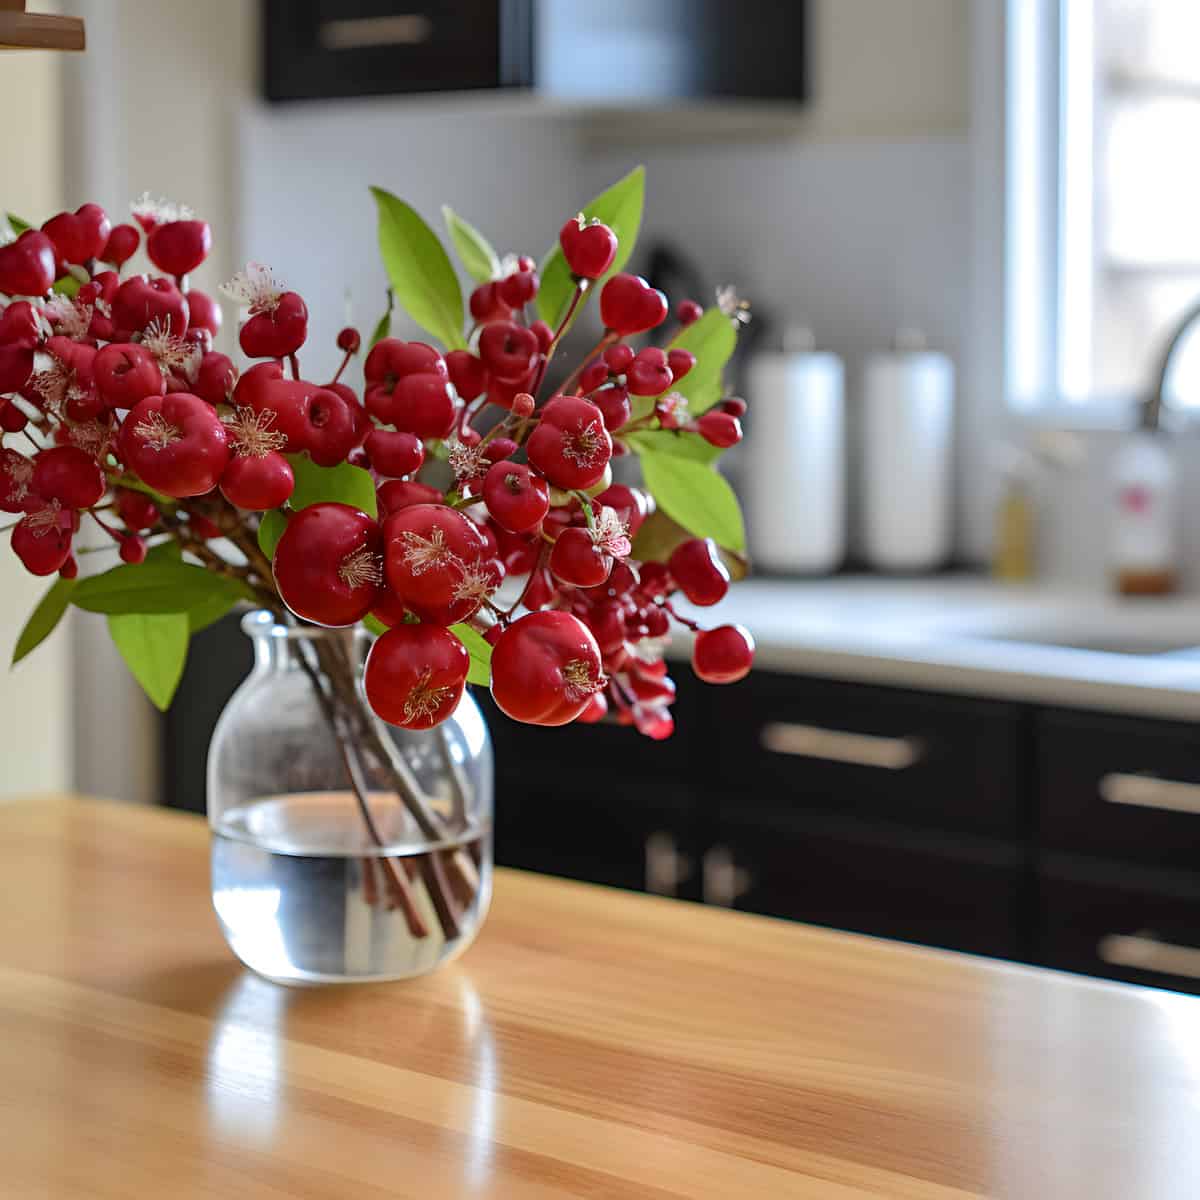 Siberian Crab Apple on a kitchen counter